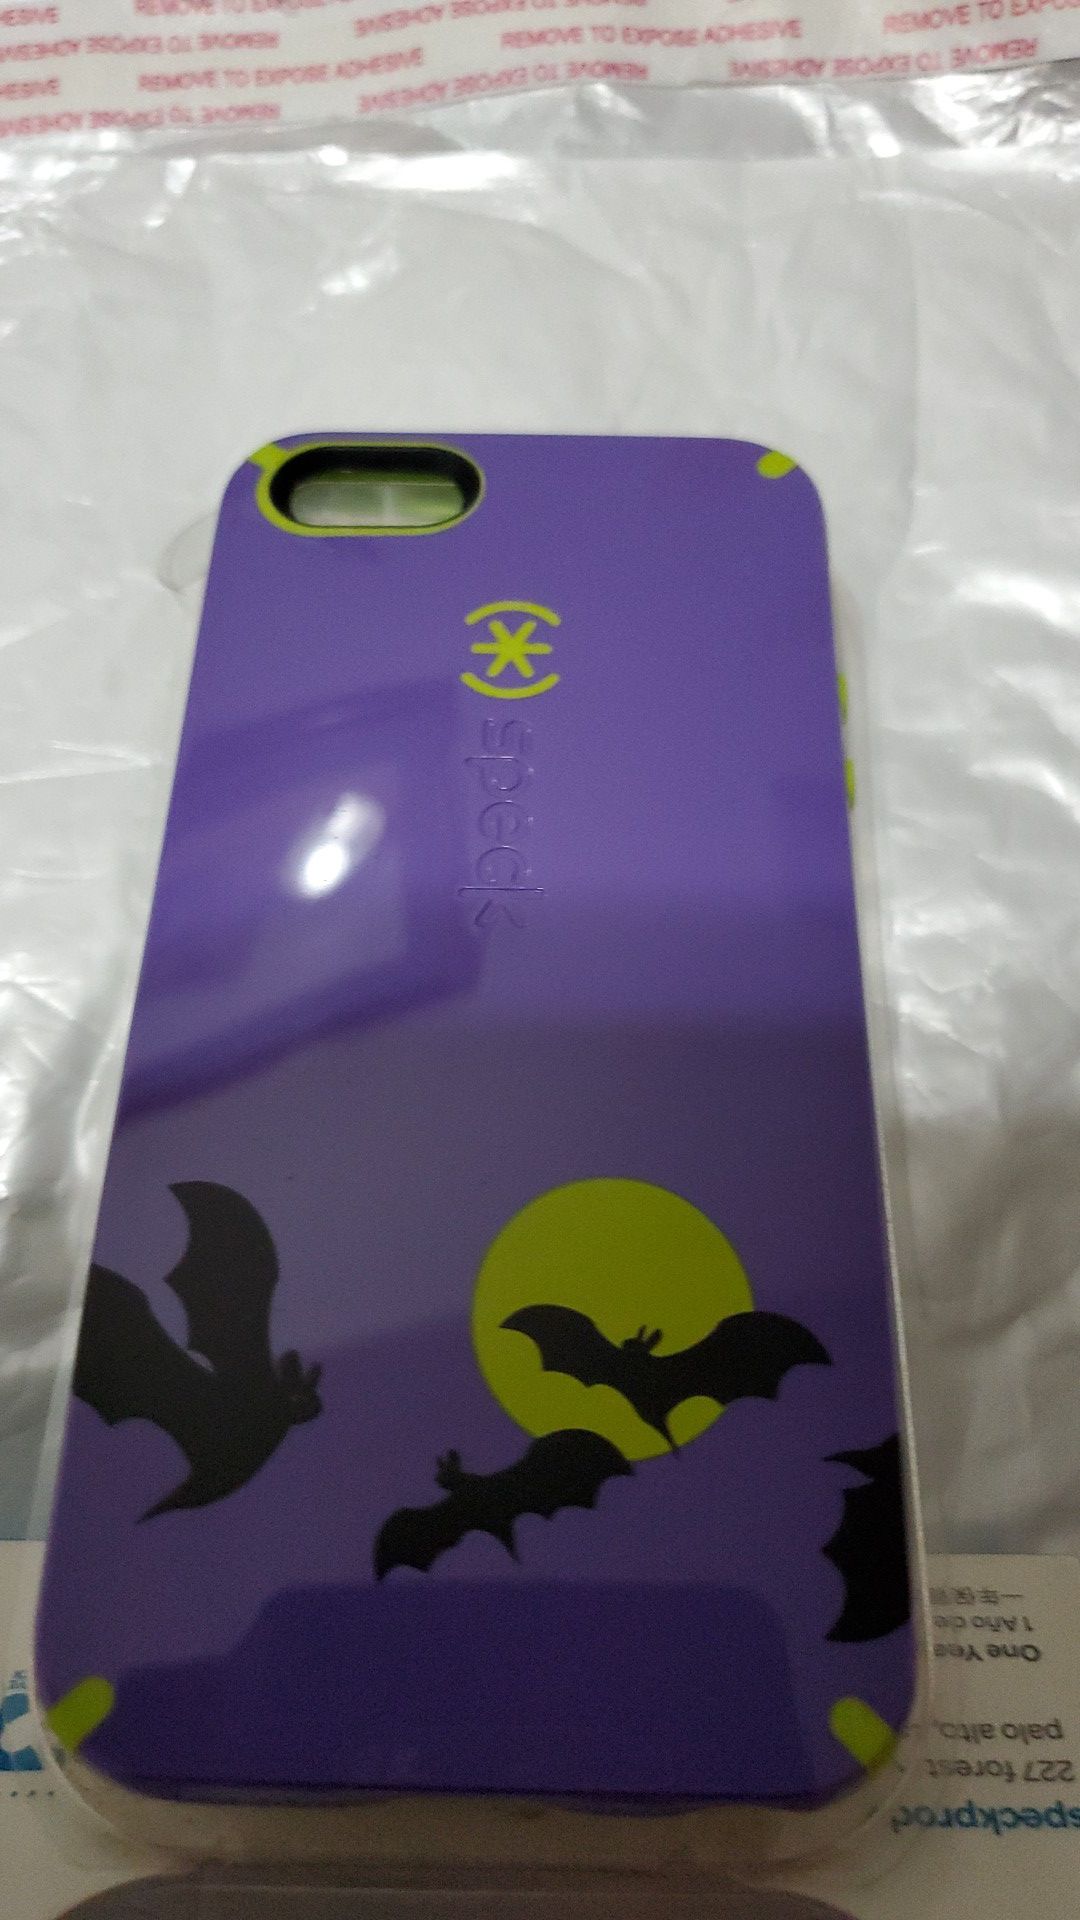 IPhone Case Speck CandyShell NEW